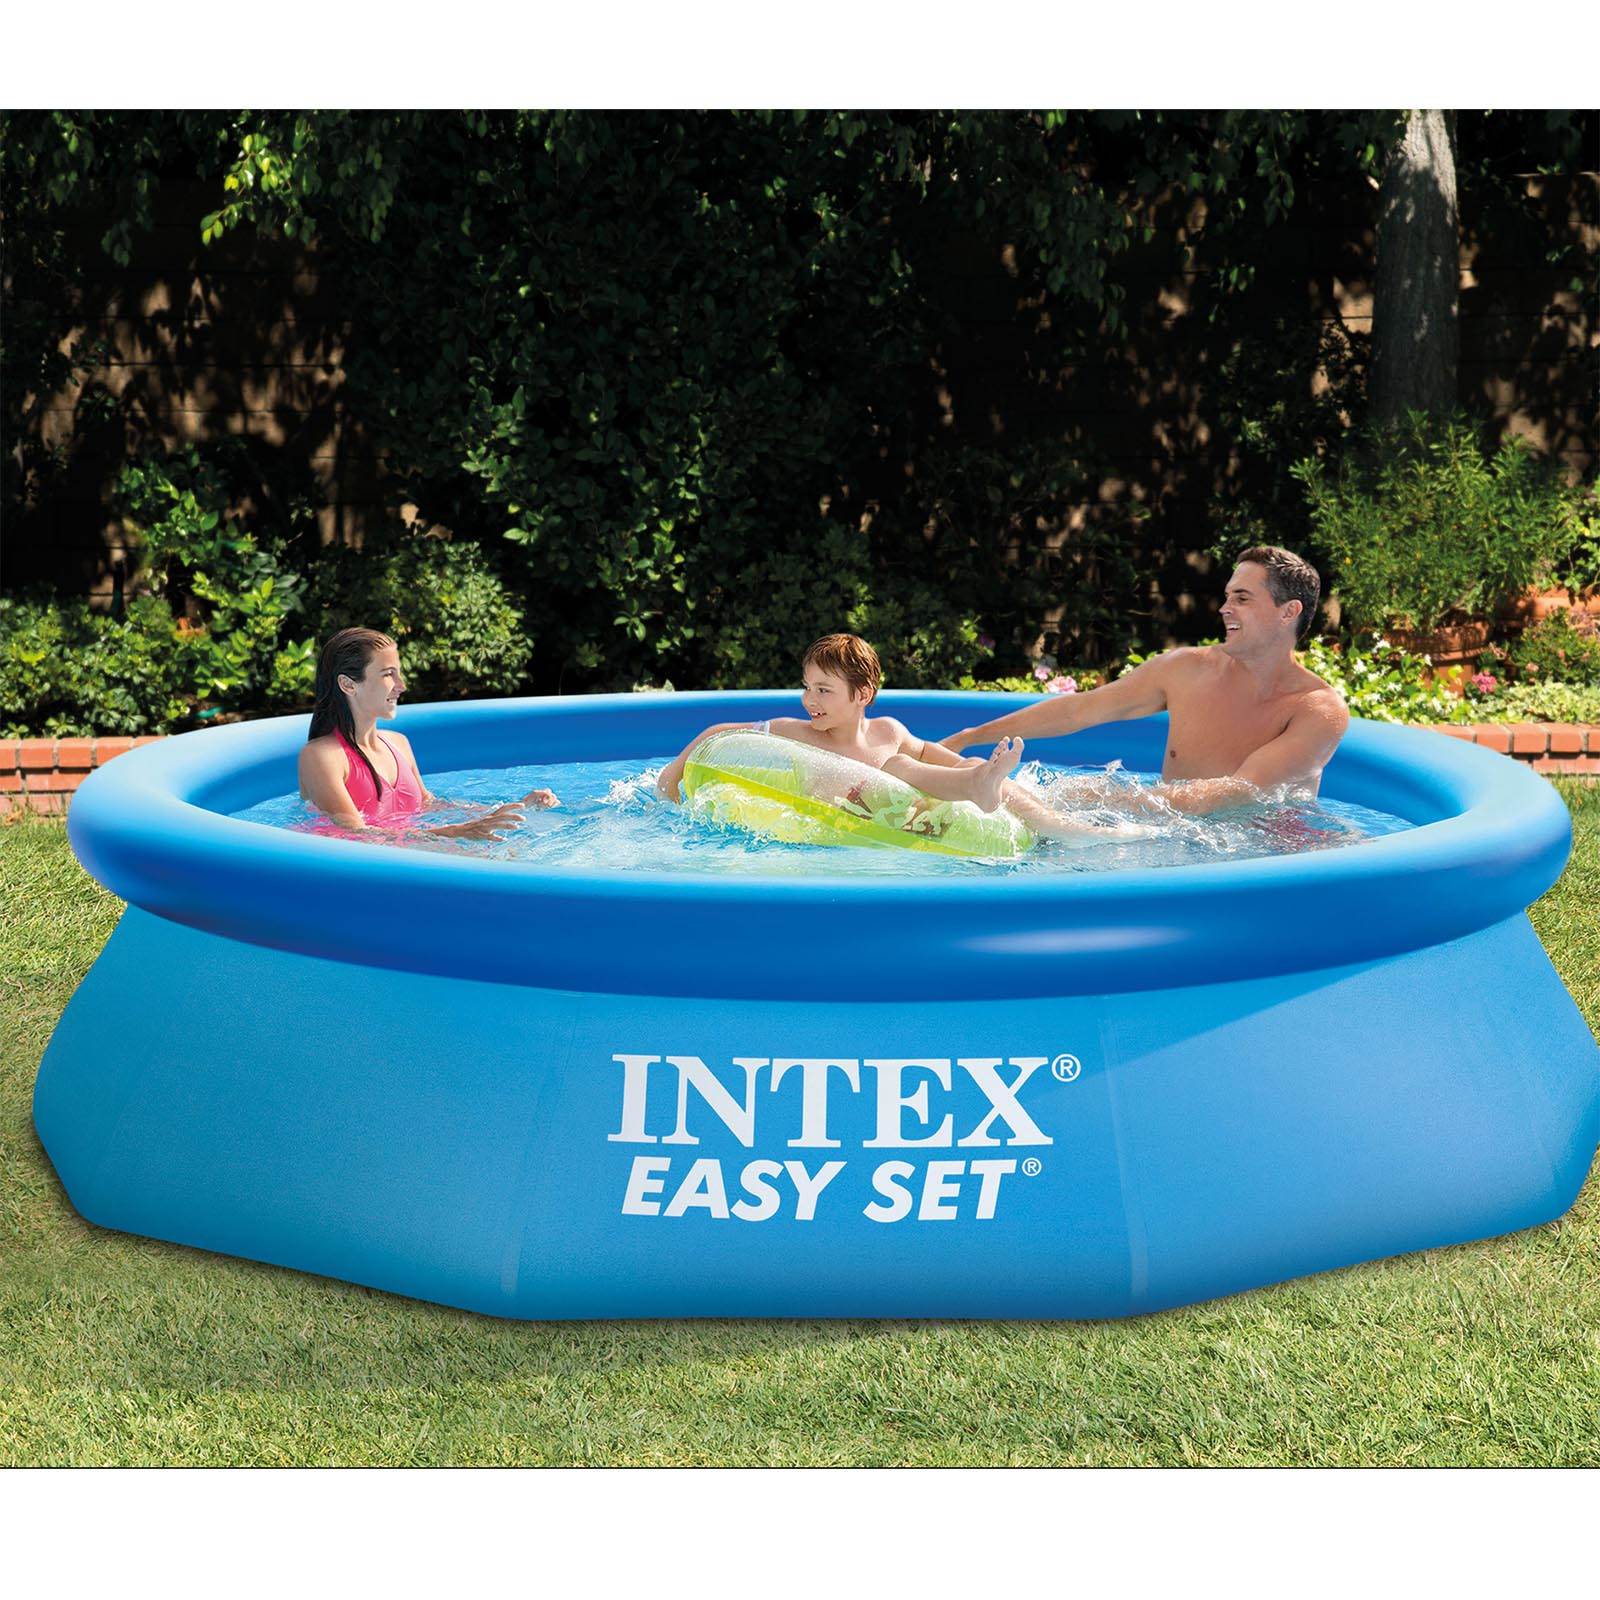 Intex Easy Set 10 Ft x 30 In Above Ground Inflatable Round Swimming Pool - image 5 of 9